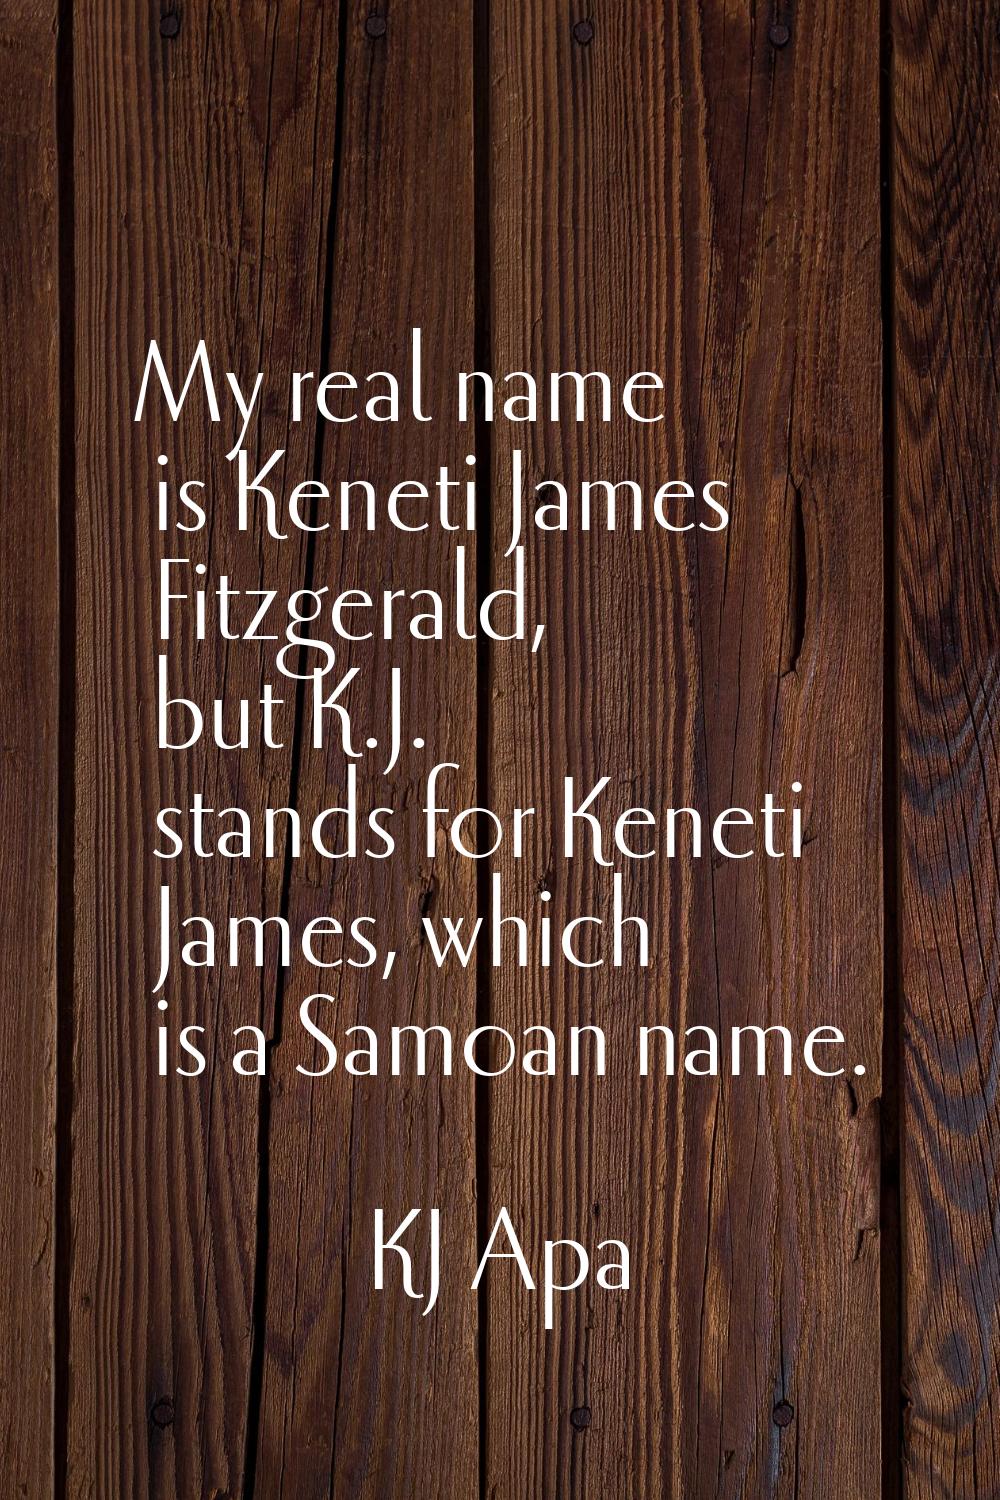 My real name is Keneti James Fitzgerald, but K.J. stands for Keneti James, which is a Samoan name.